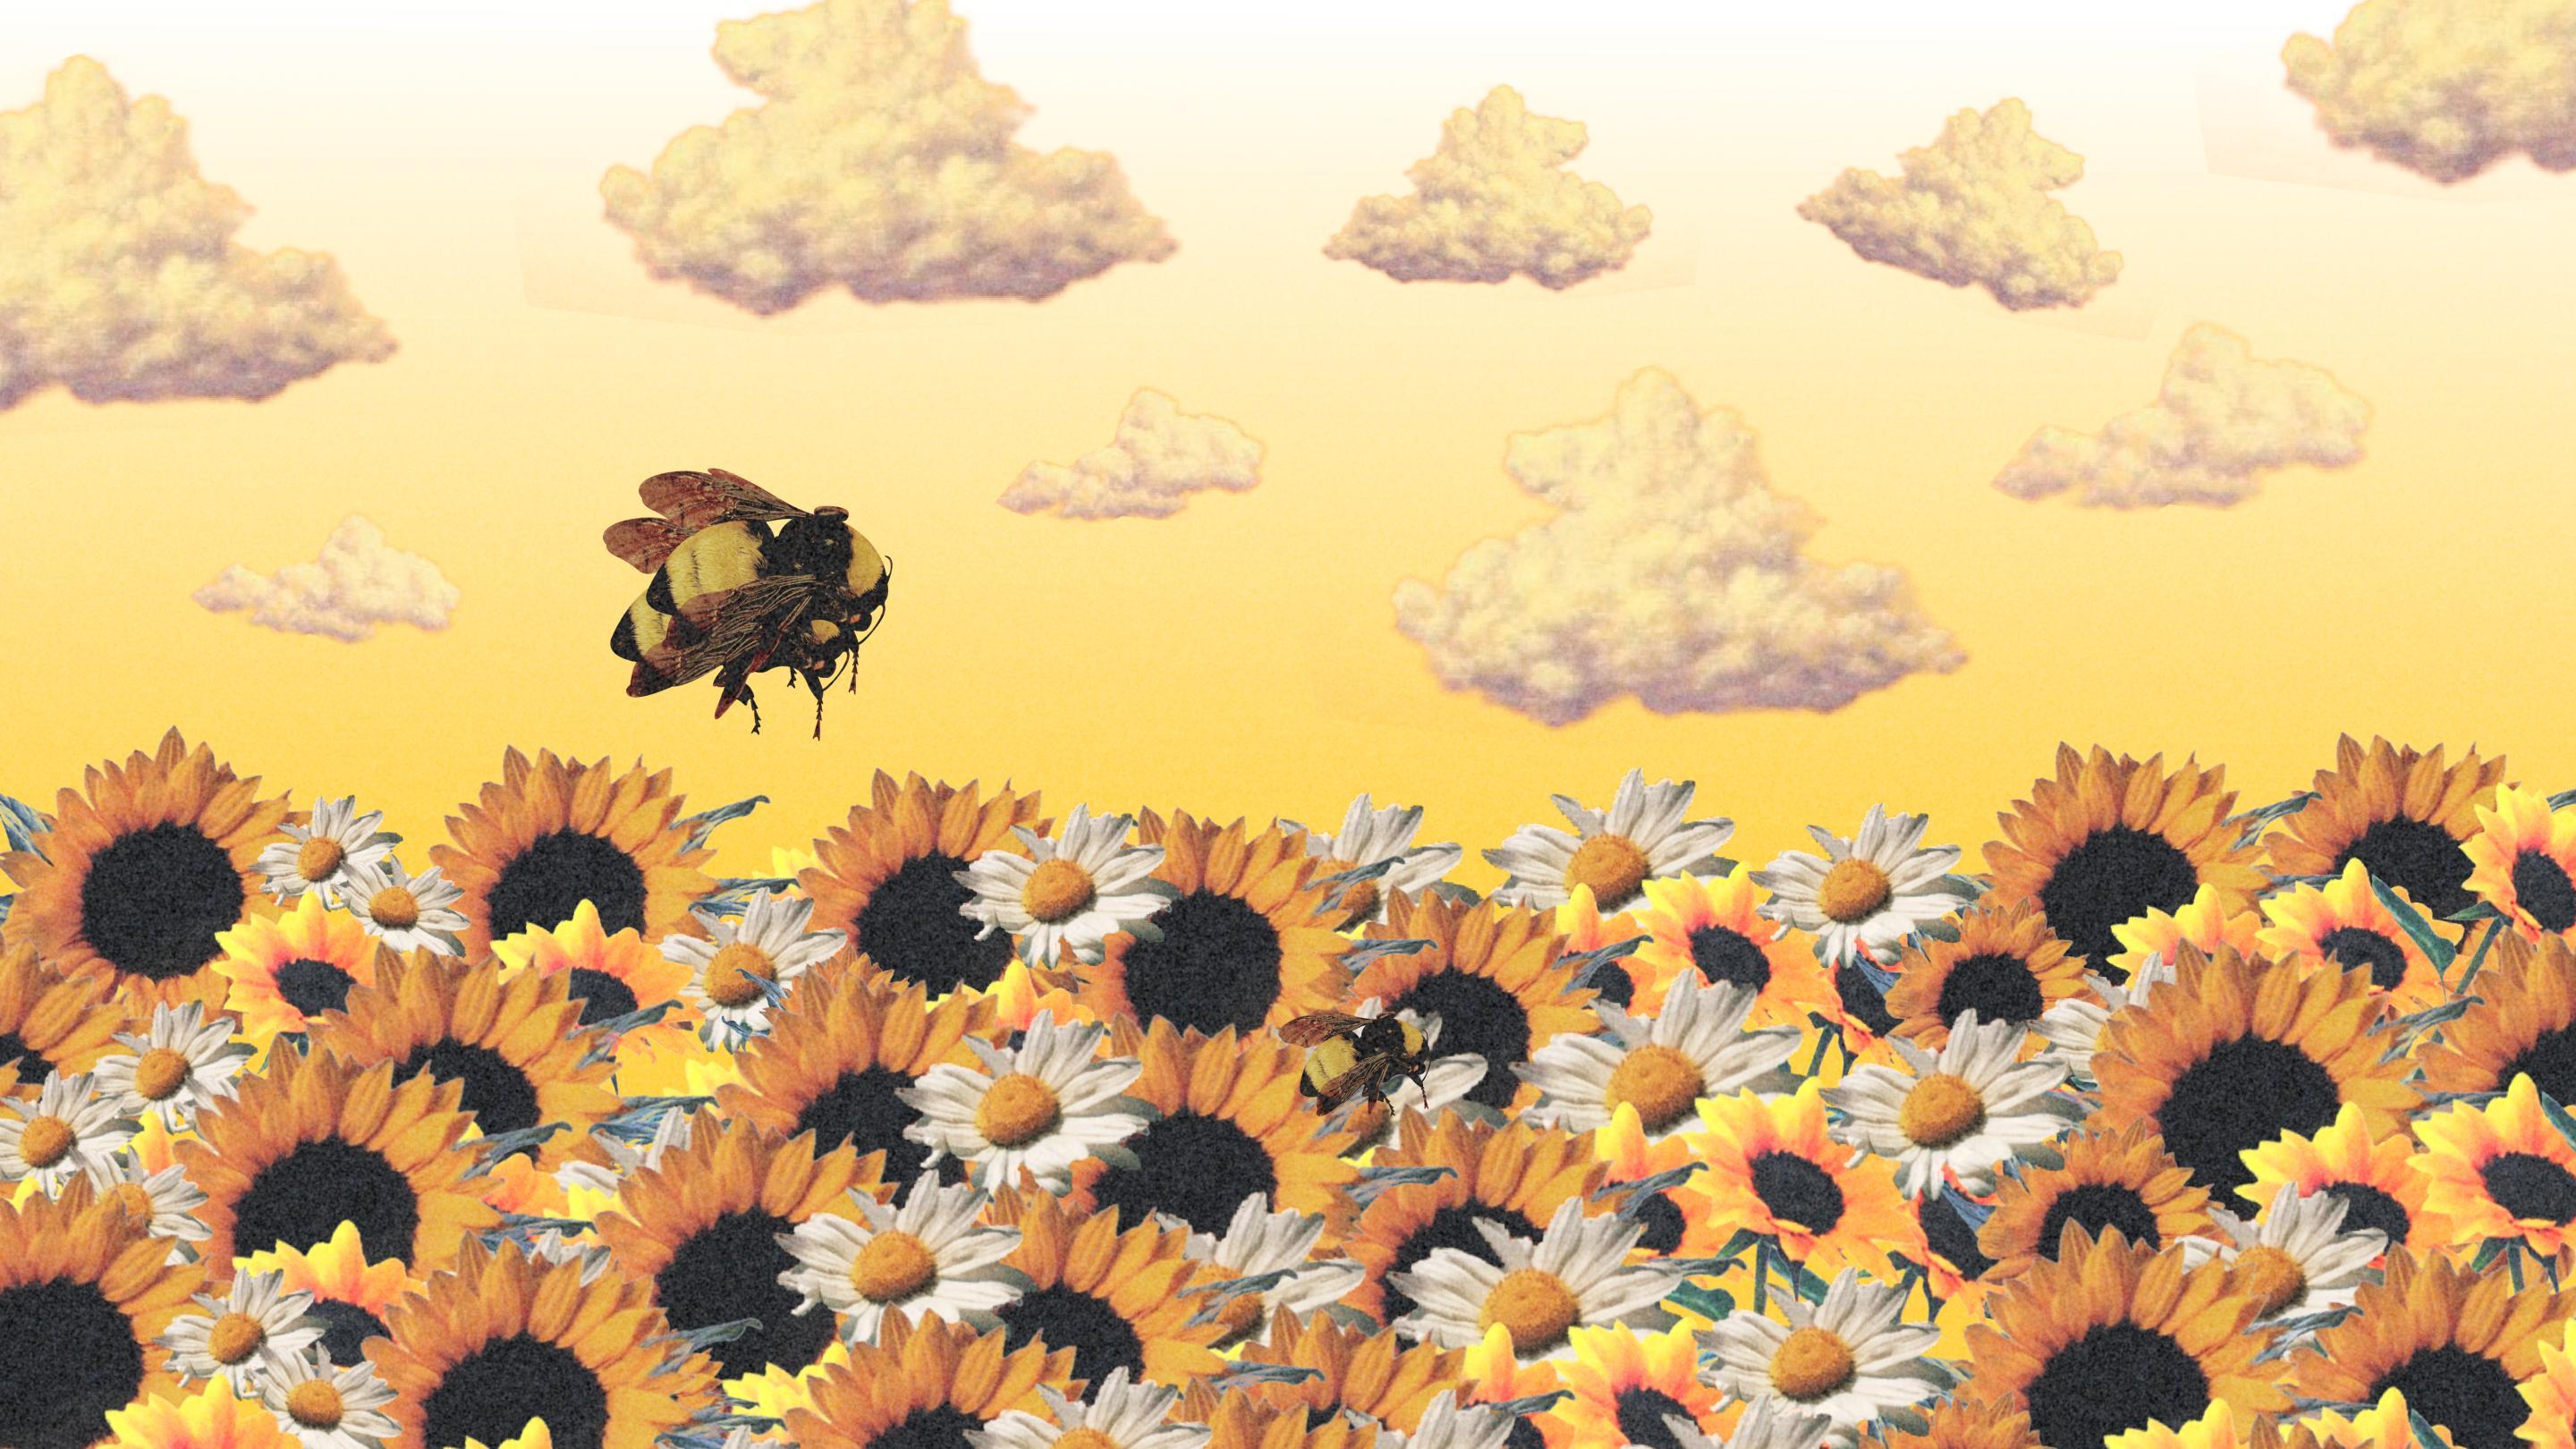 A bee flies over a field of sunflowers and daisies. - Bee